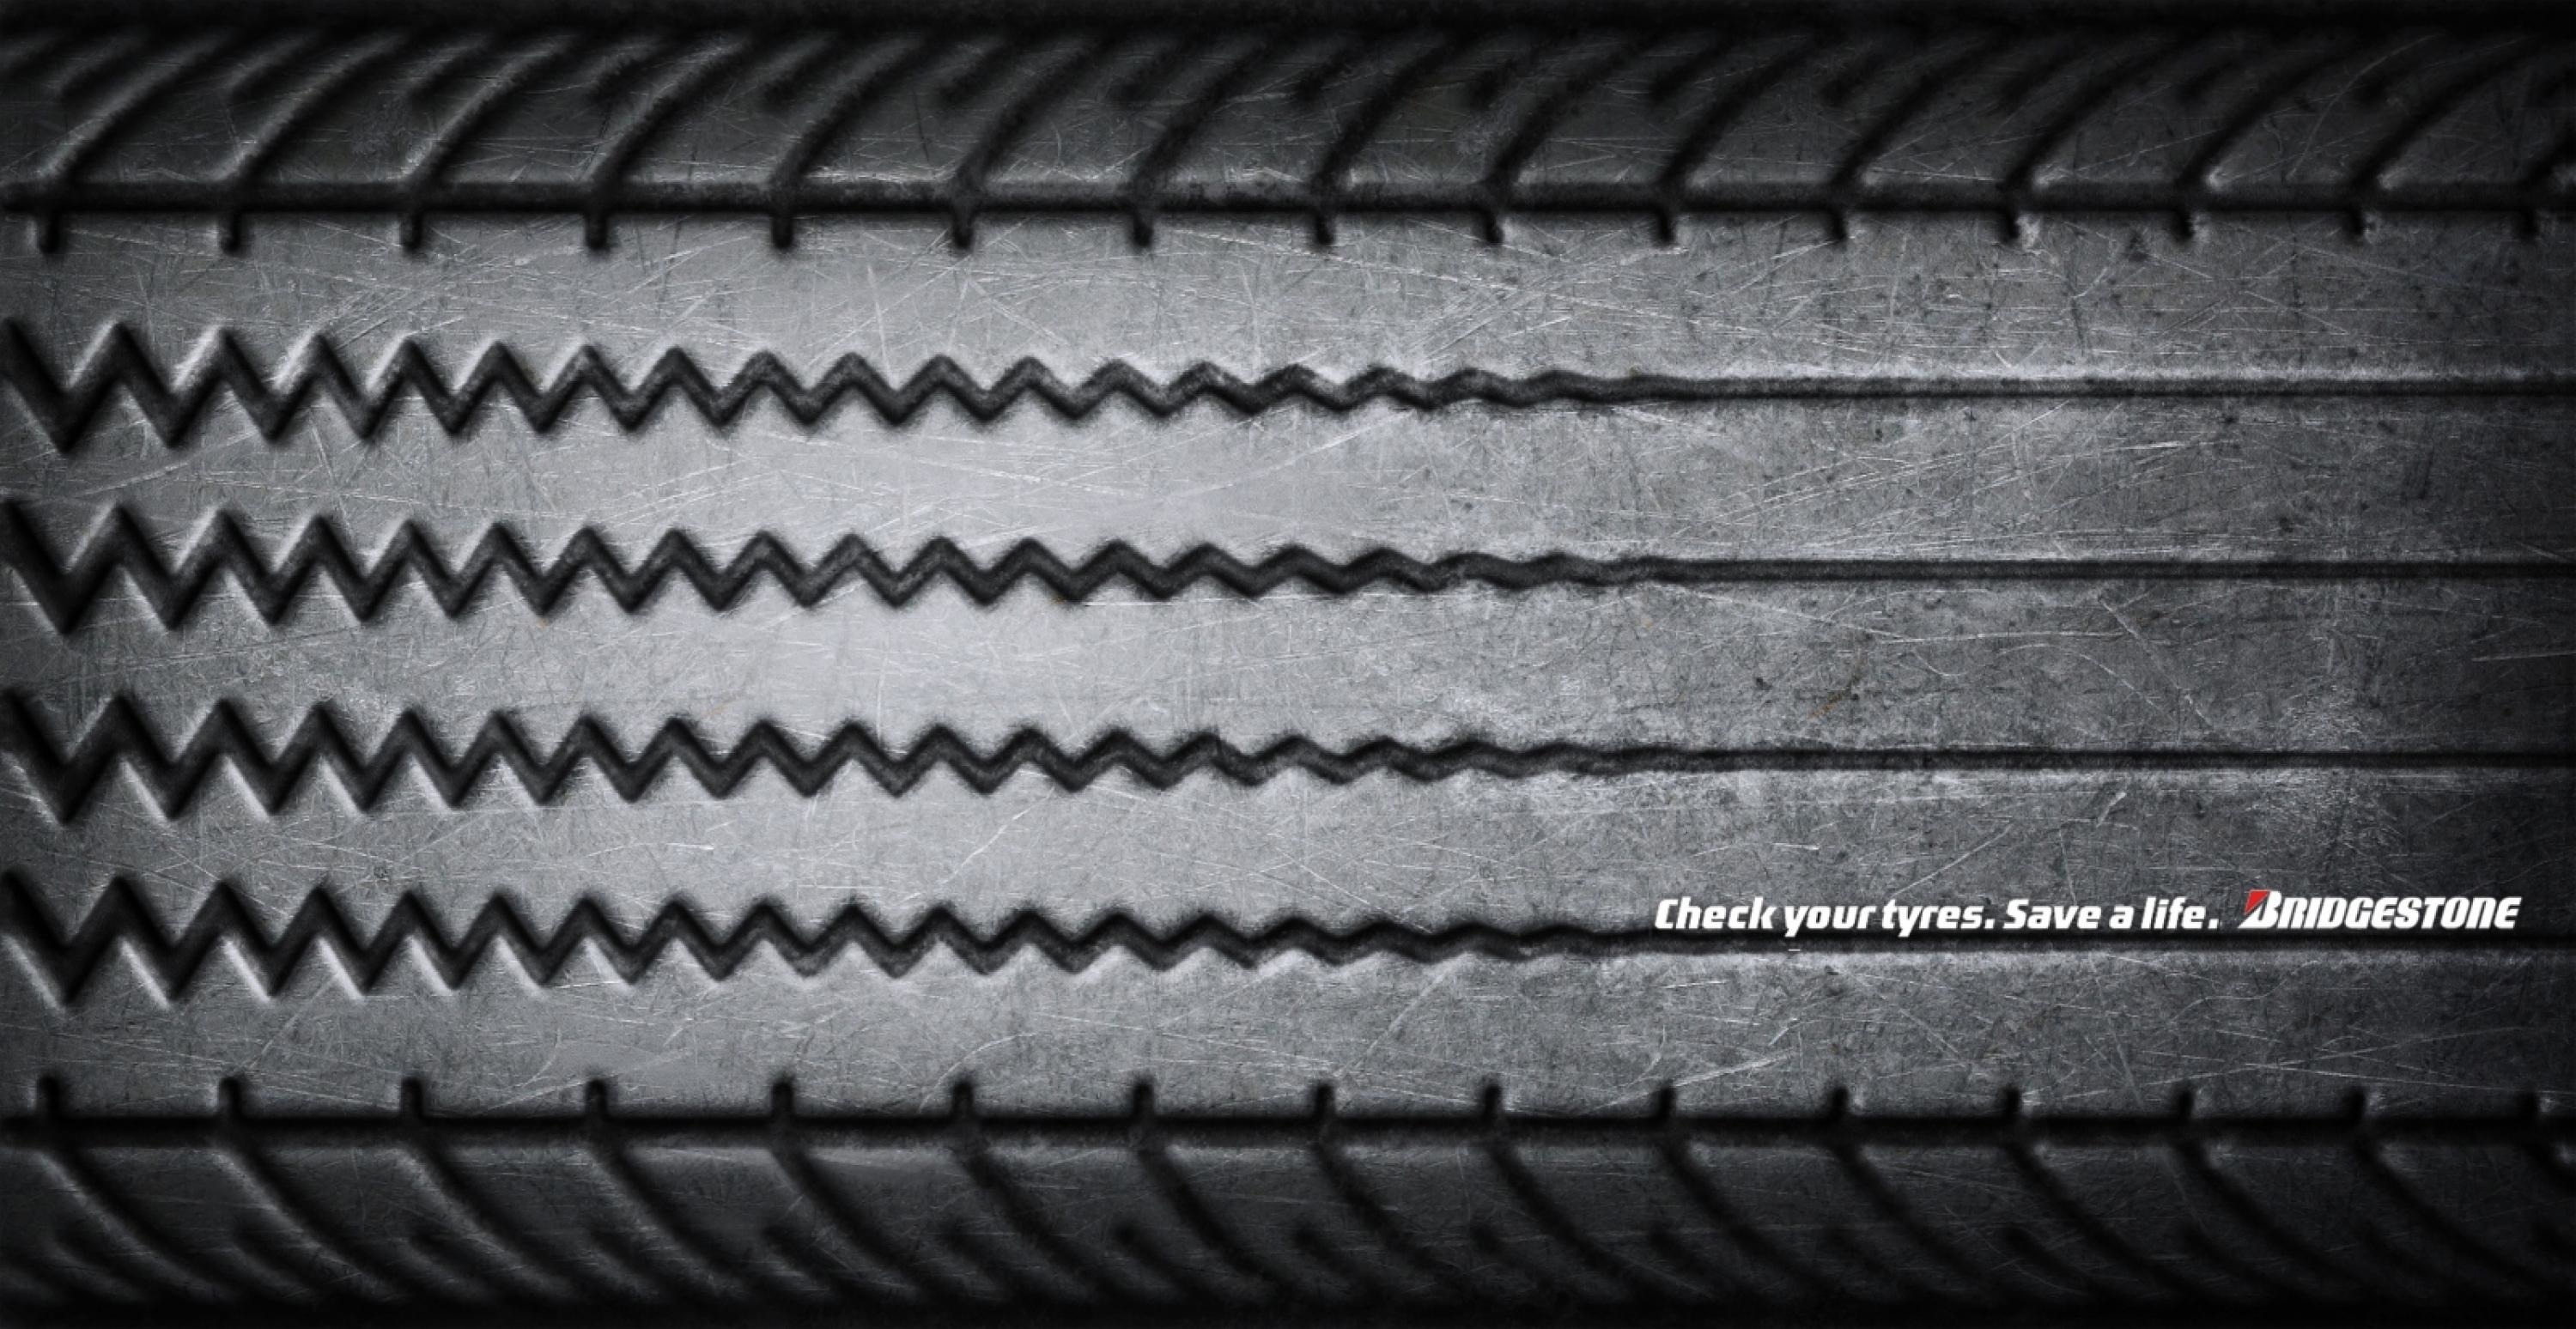 CHANGE YOUR TYRES CAMPAIGN